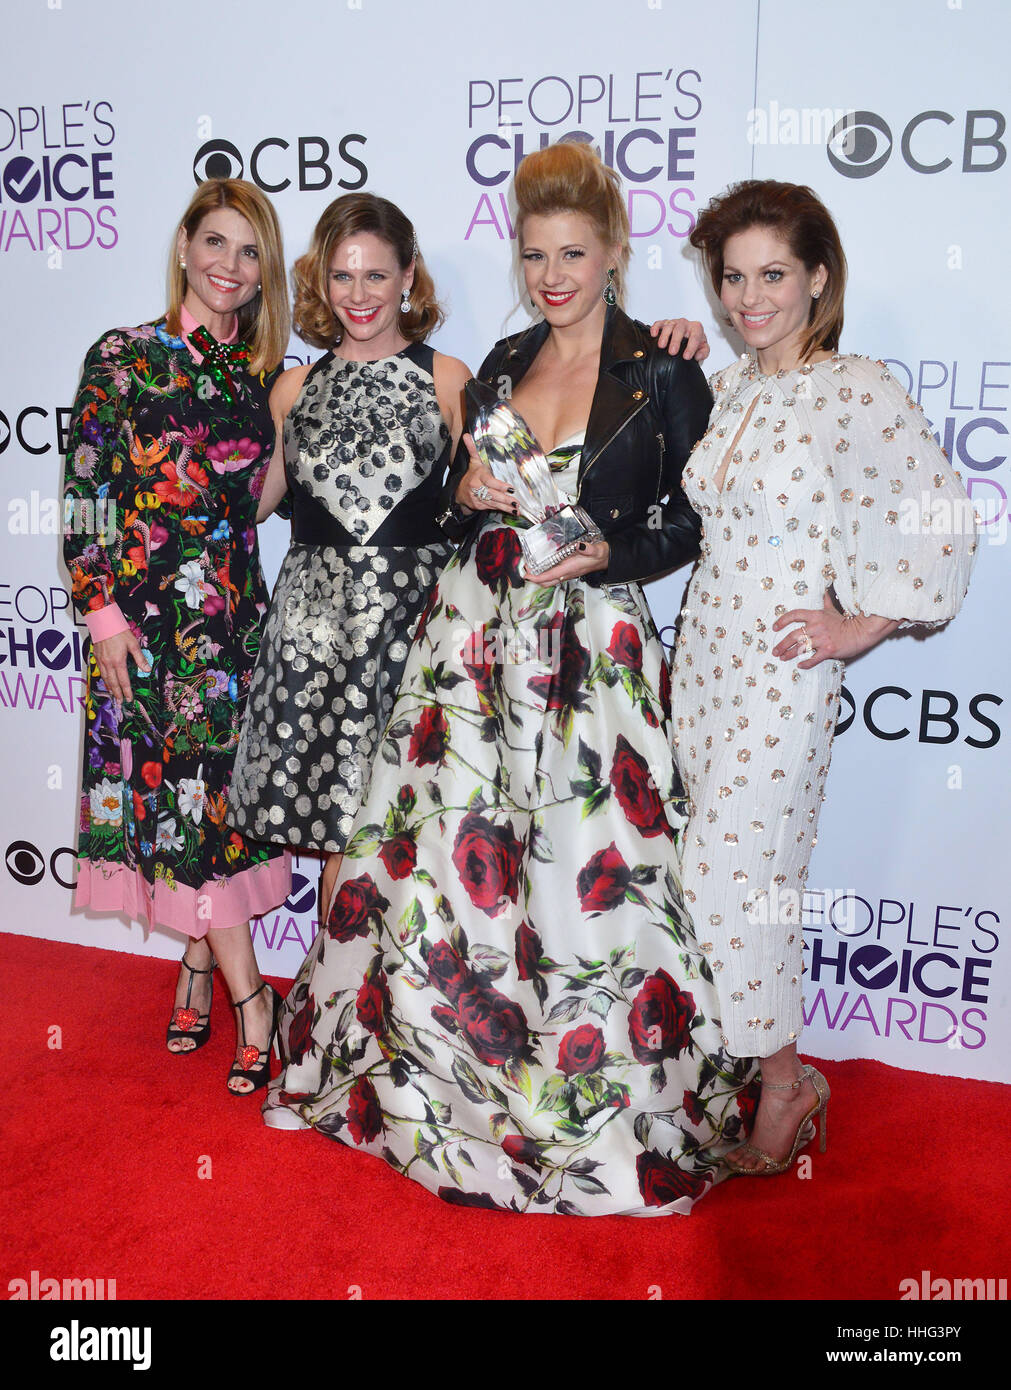 Lori Loughlin, Andrea Barber, Jodie Sweetin and Candace Cameron Bure  arriving at the People's Choice Awards 2017 at the Microsoft Theatre in Los Angeles. January 18, 2017. Stock Photo